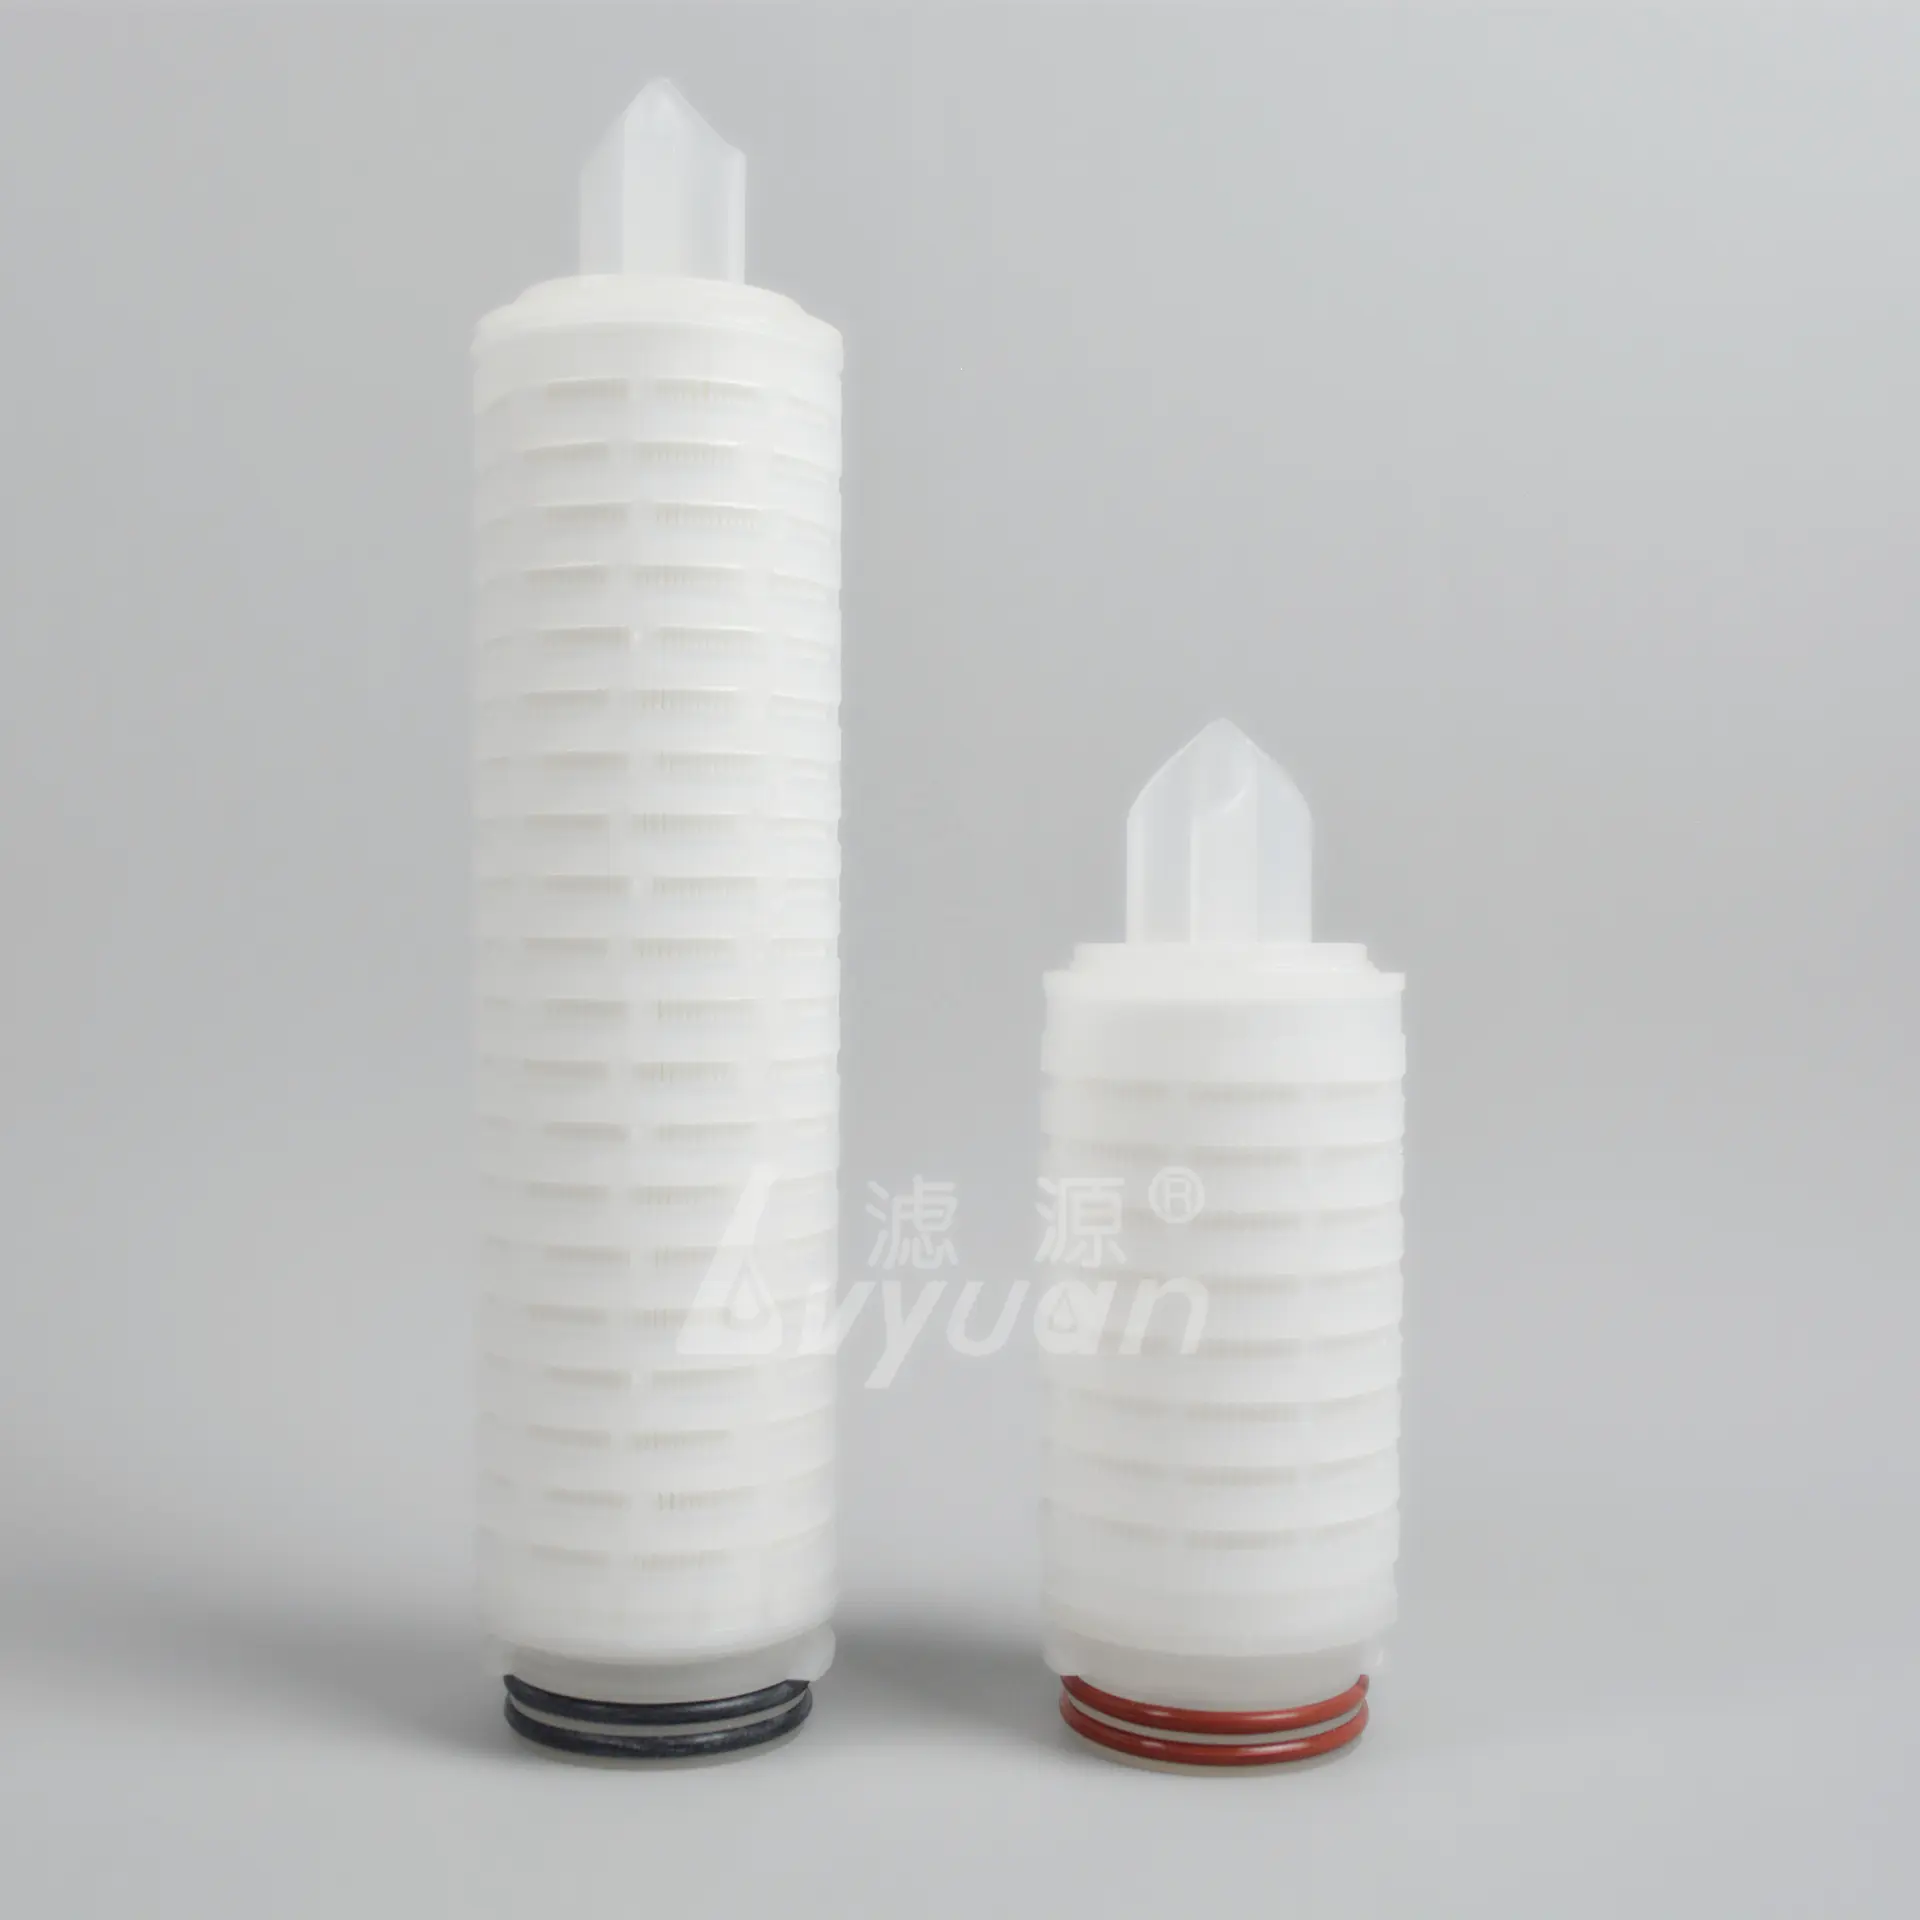 Hot sale Pleated membrane water filter/Filter Cartridge 10 20 30 40 inchfor water